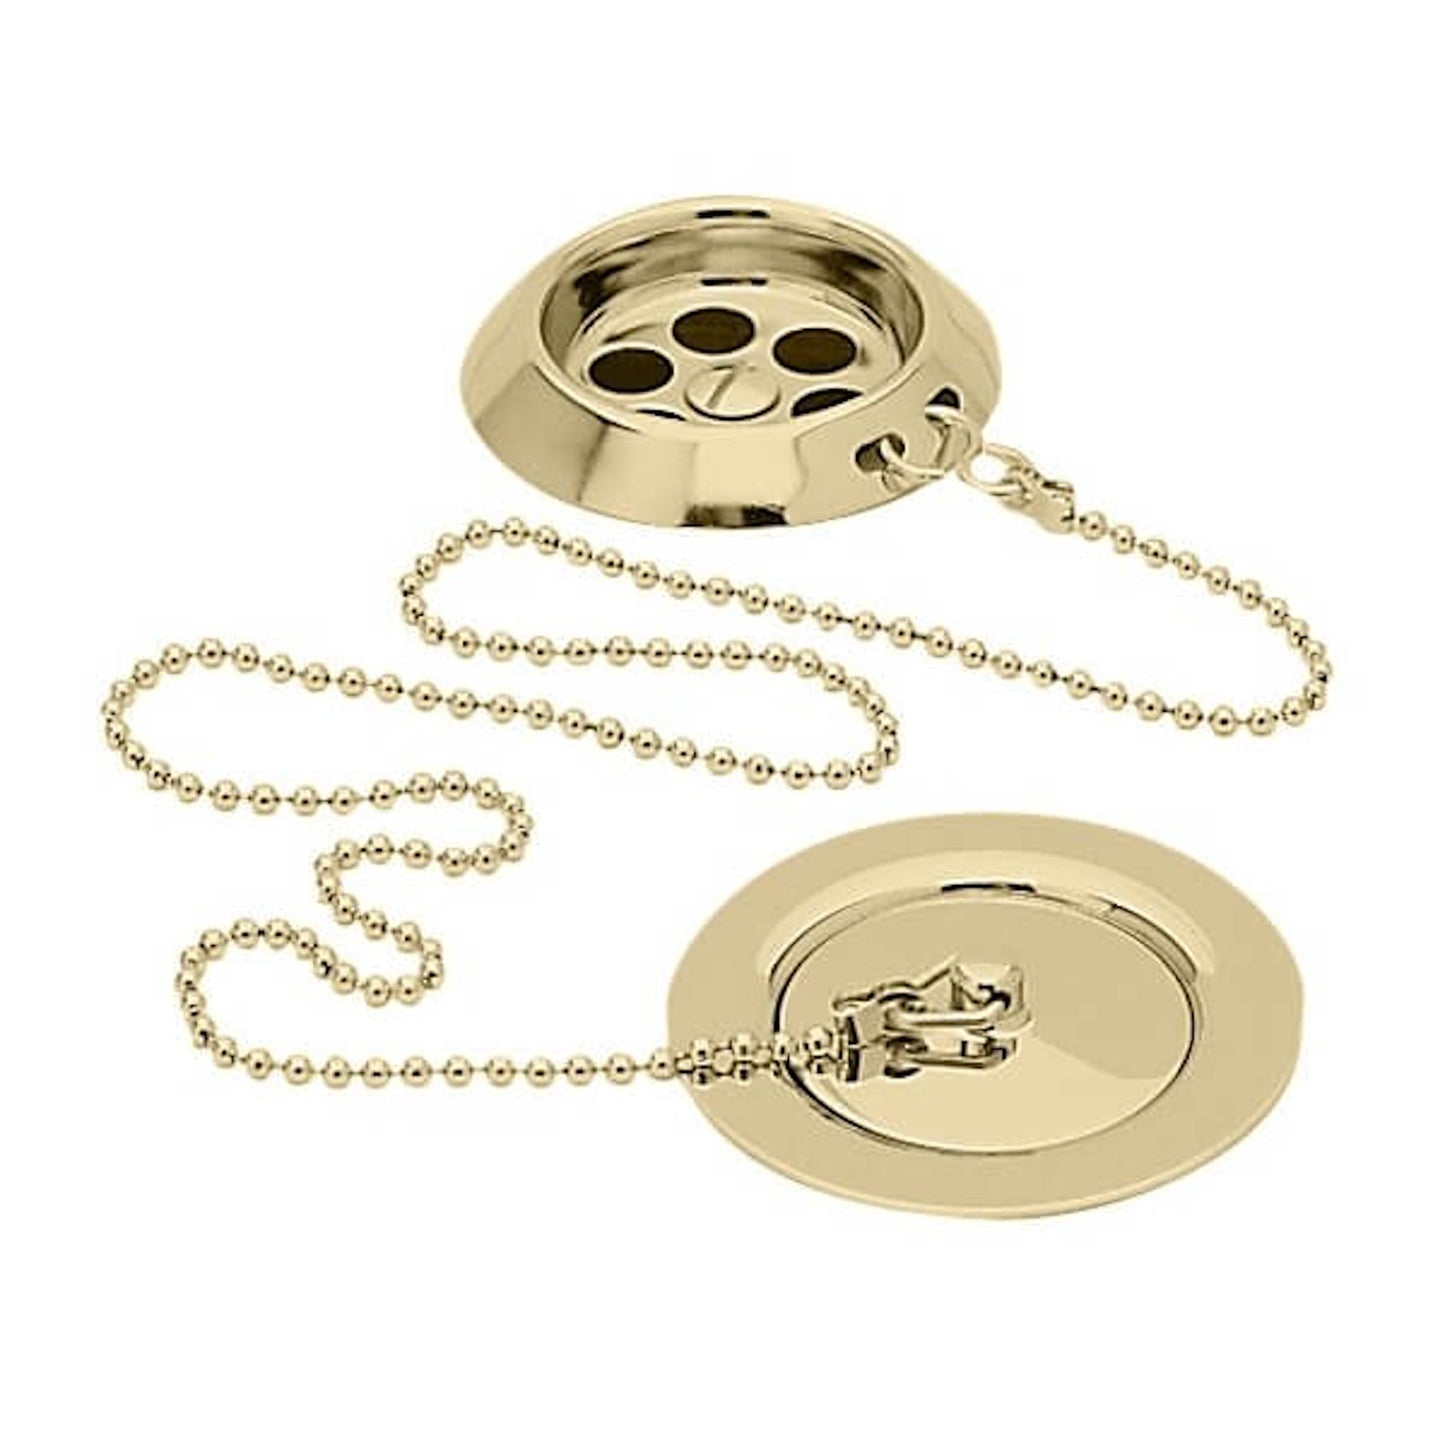 Traditional Exposed Bath Retainer Waste & Ball Chain Plug with Overflow - English Gold